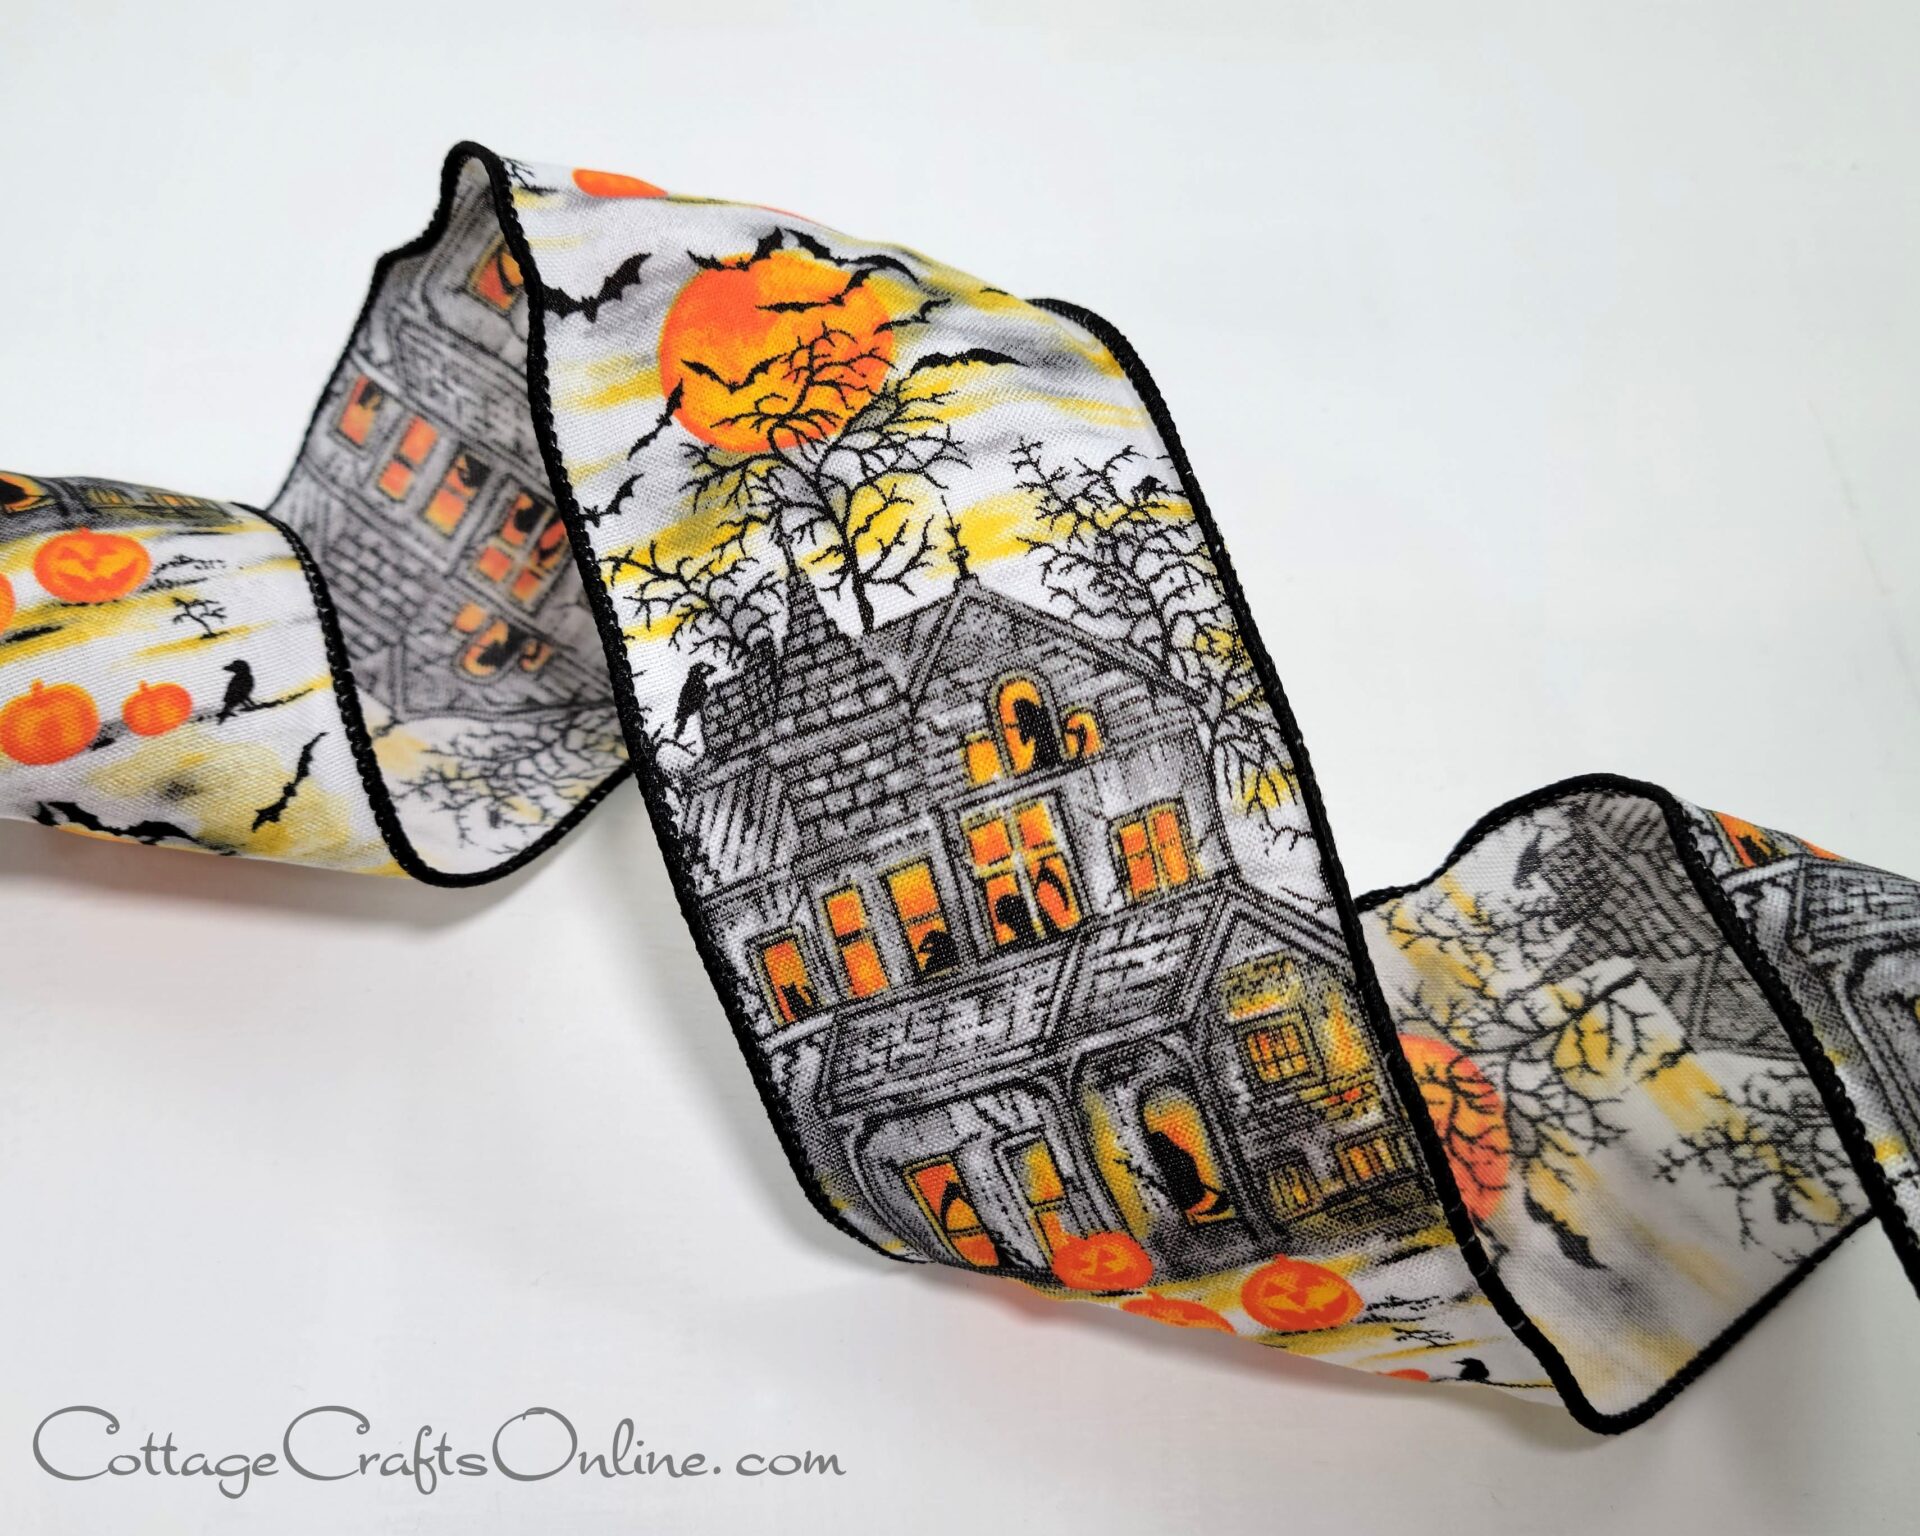 A new fall ribbon featuring a house for Halloween.